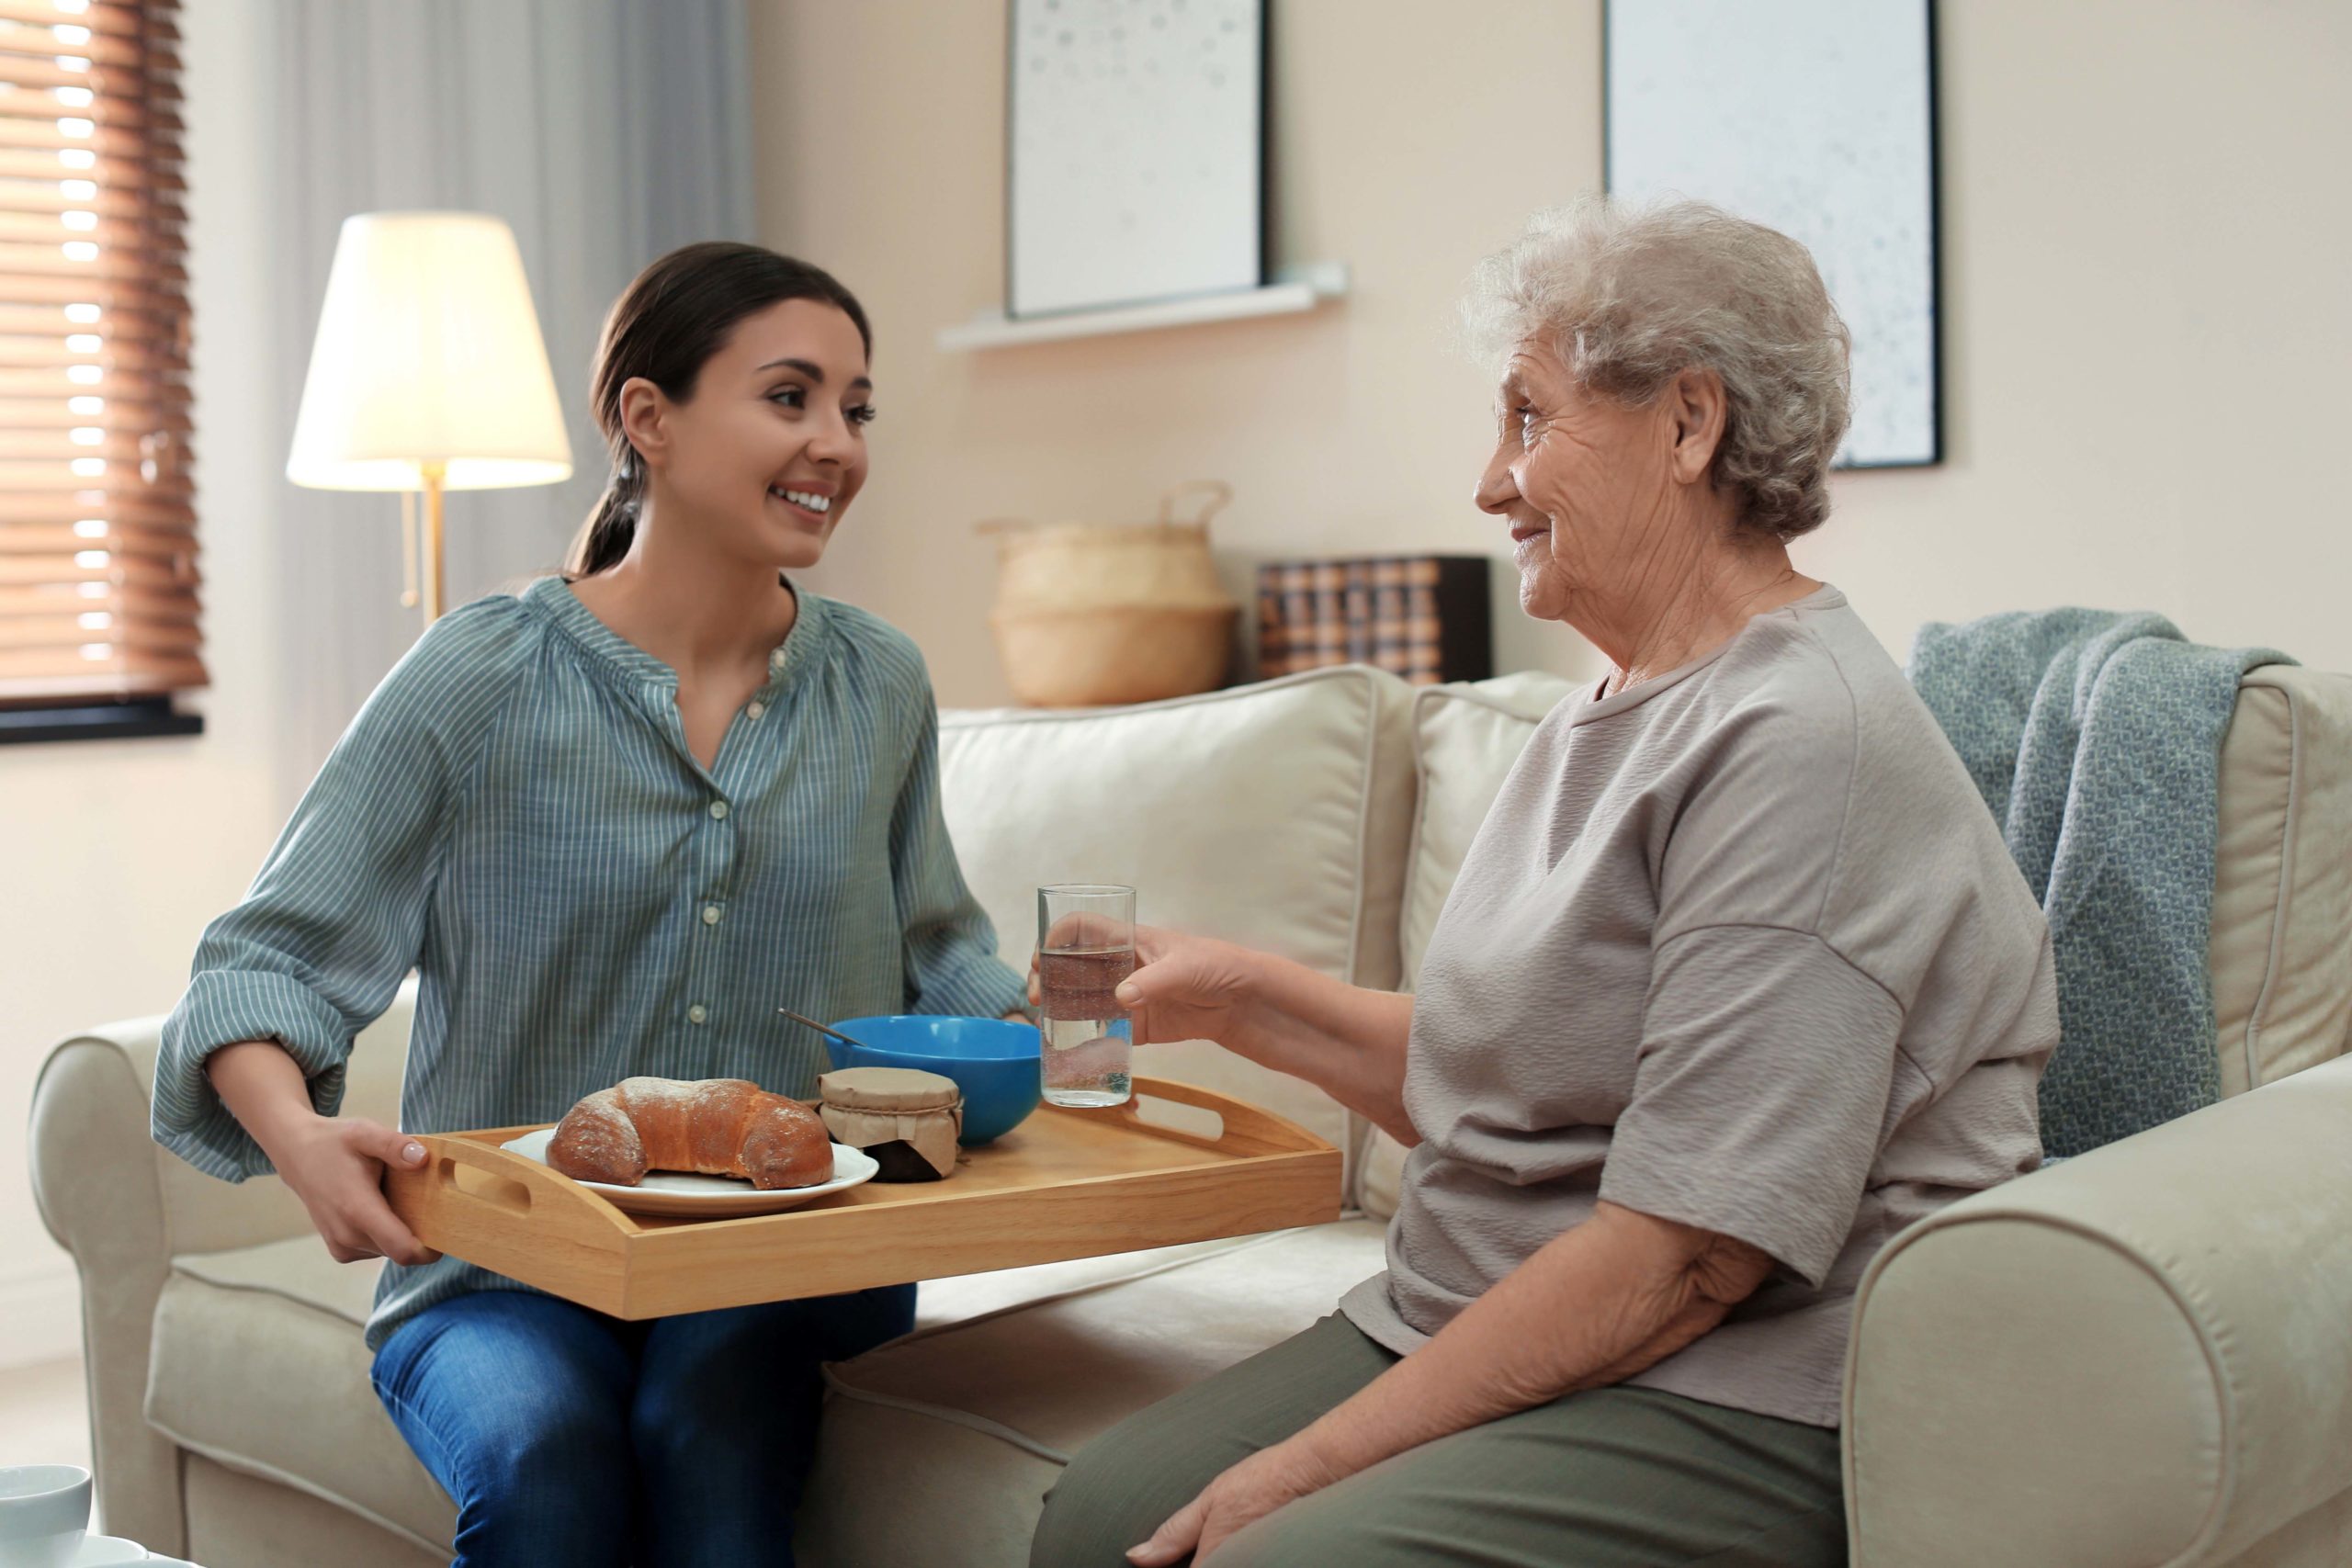 A caregiver presenting a tray of food to a senior woman.